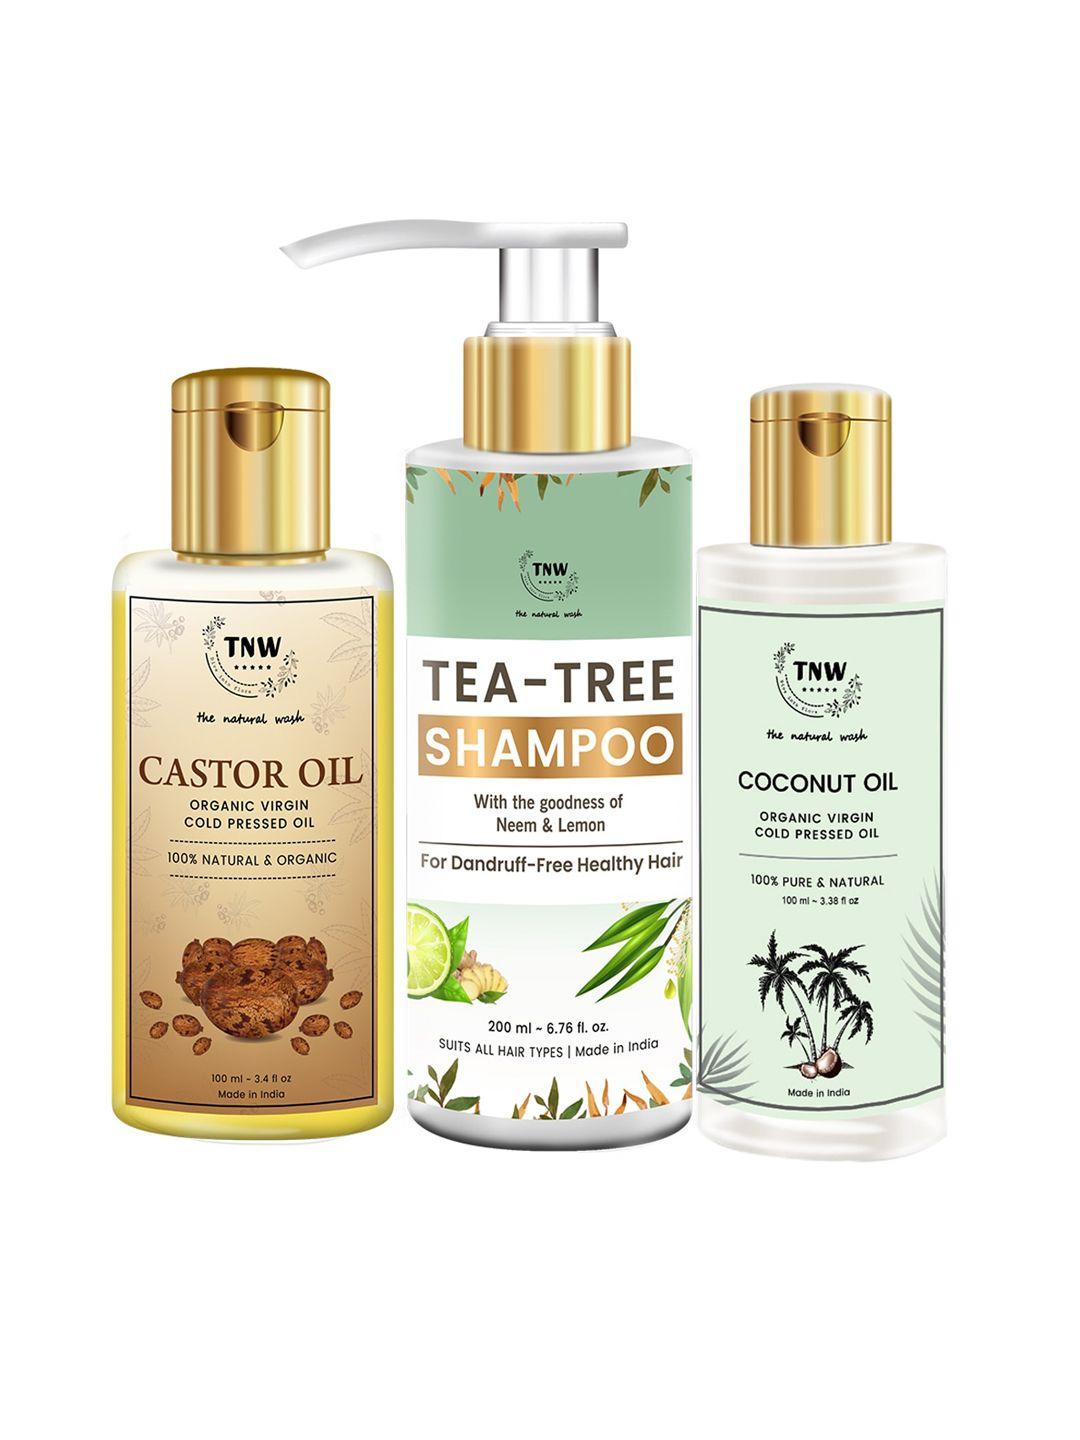 tnw the natural wash white beauty gift set